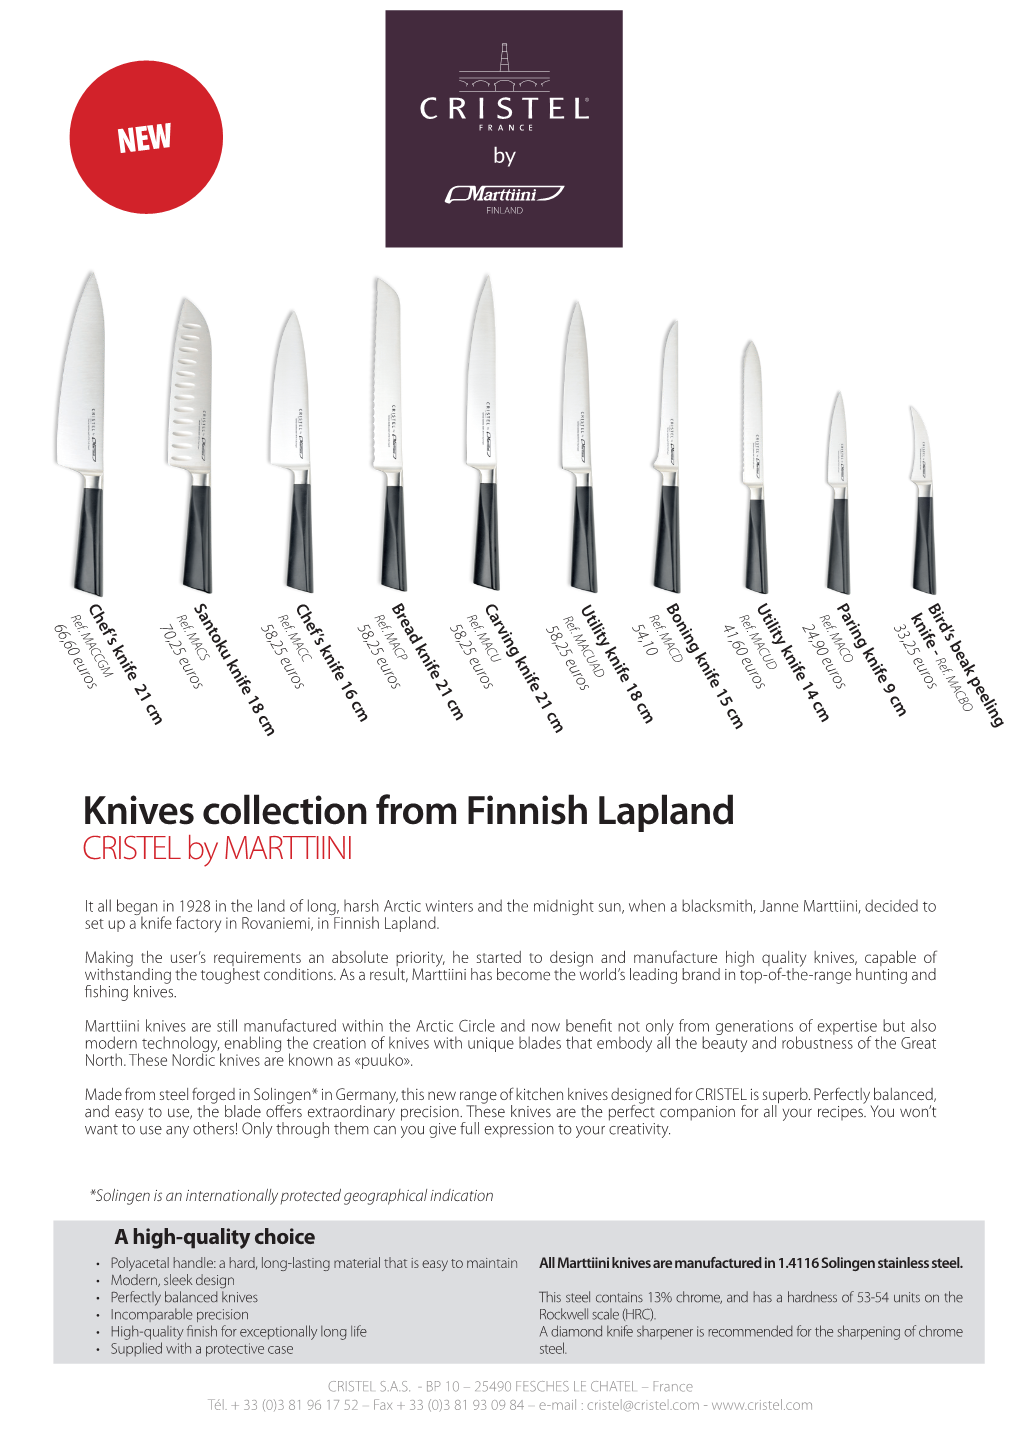 Knives Collection from Finnish Lapland CRISTEL by MARTTIINI